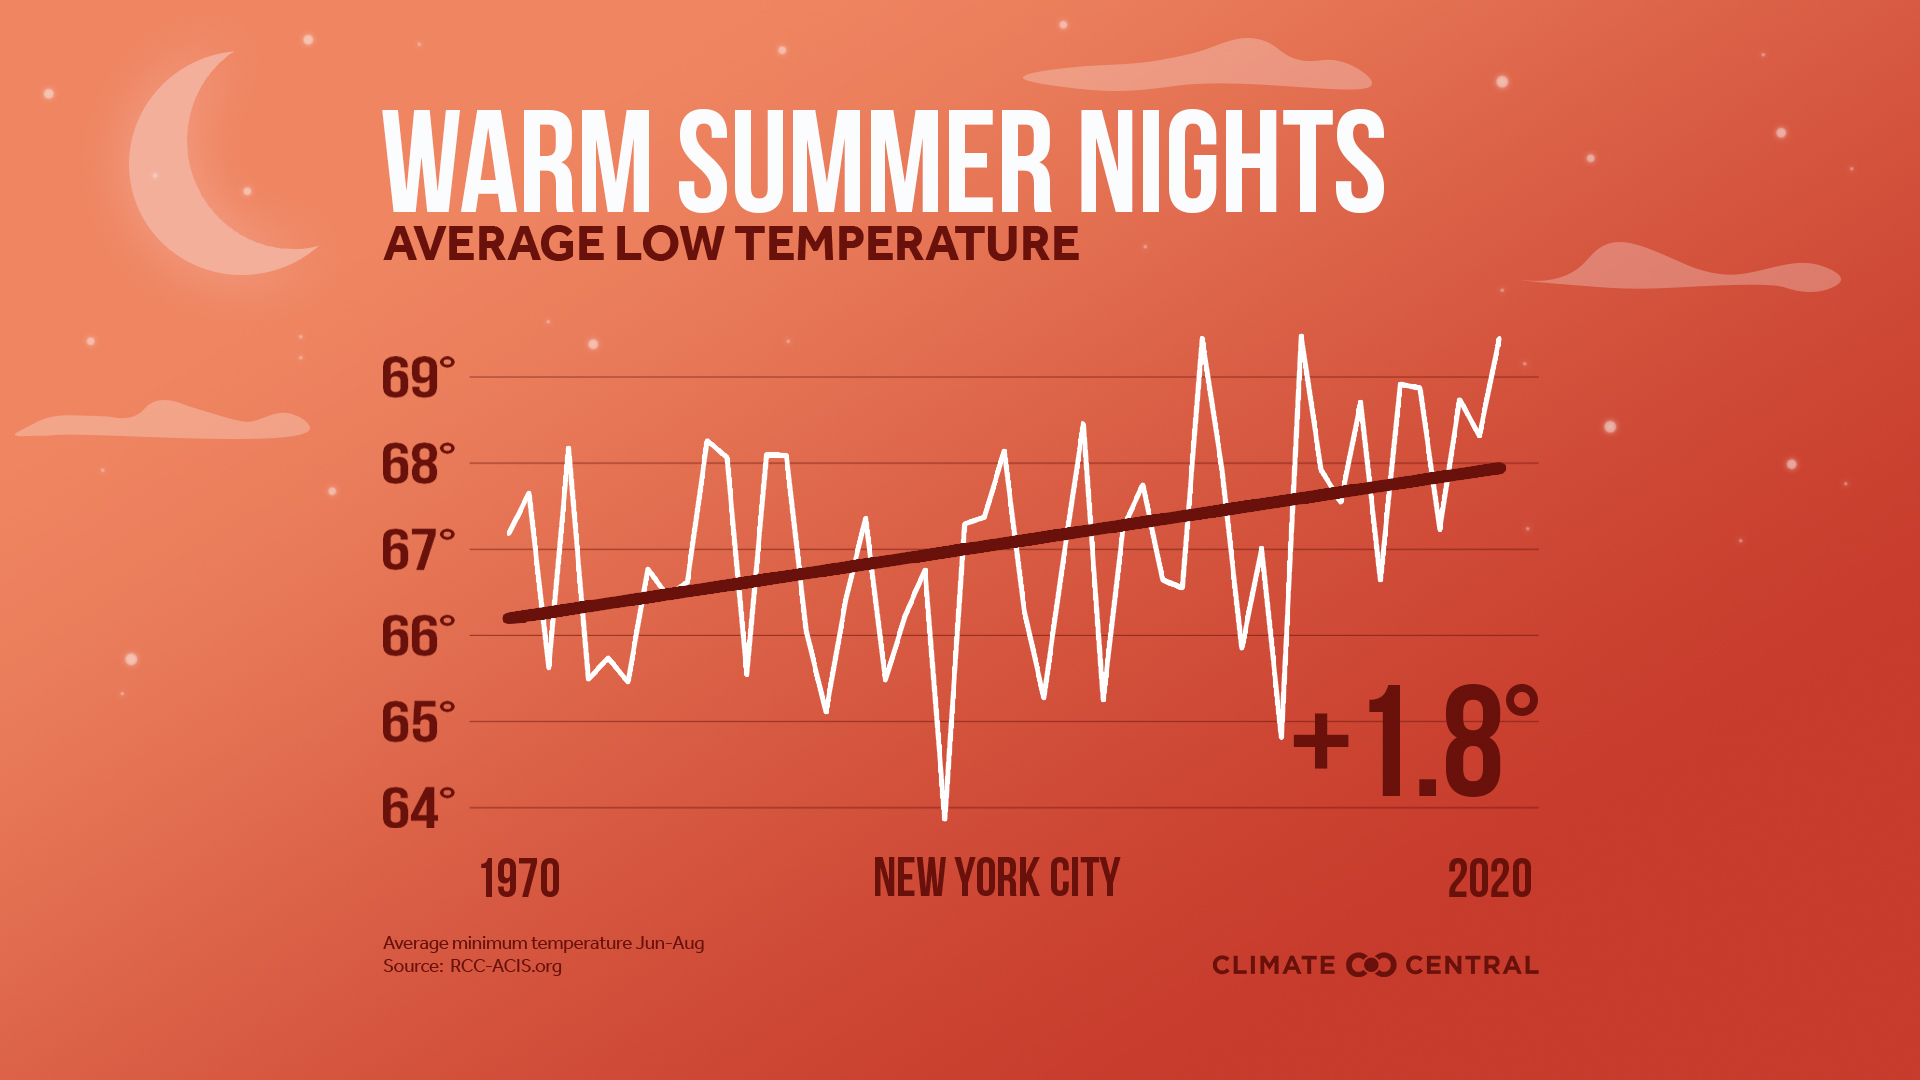 The heat this week may be linked to local climate trends in New York City.